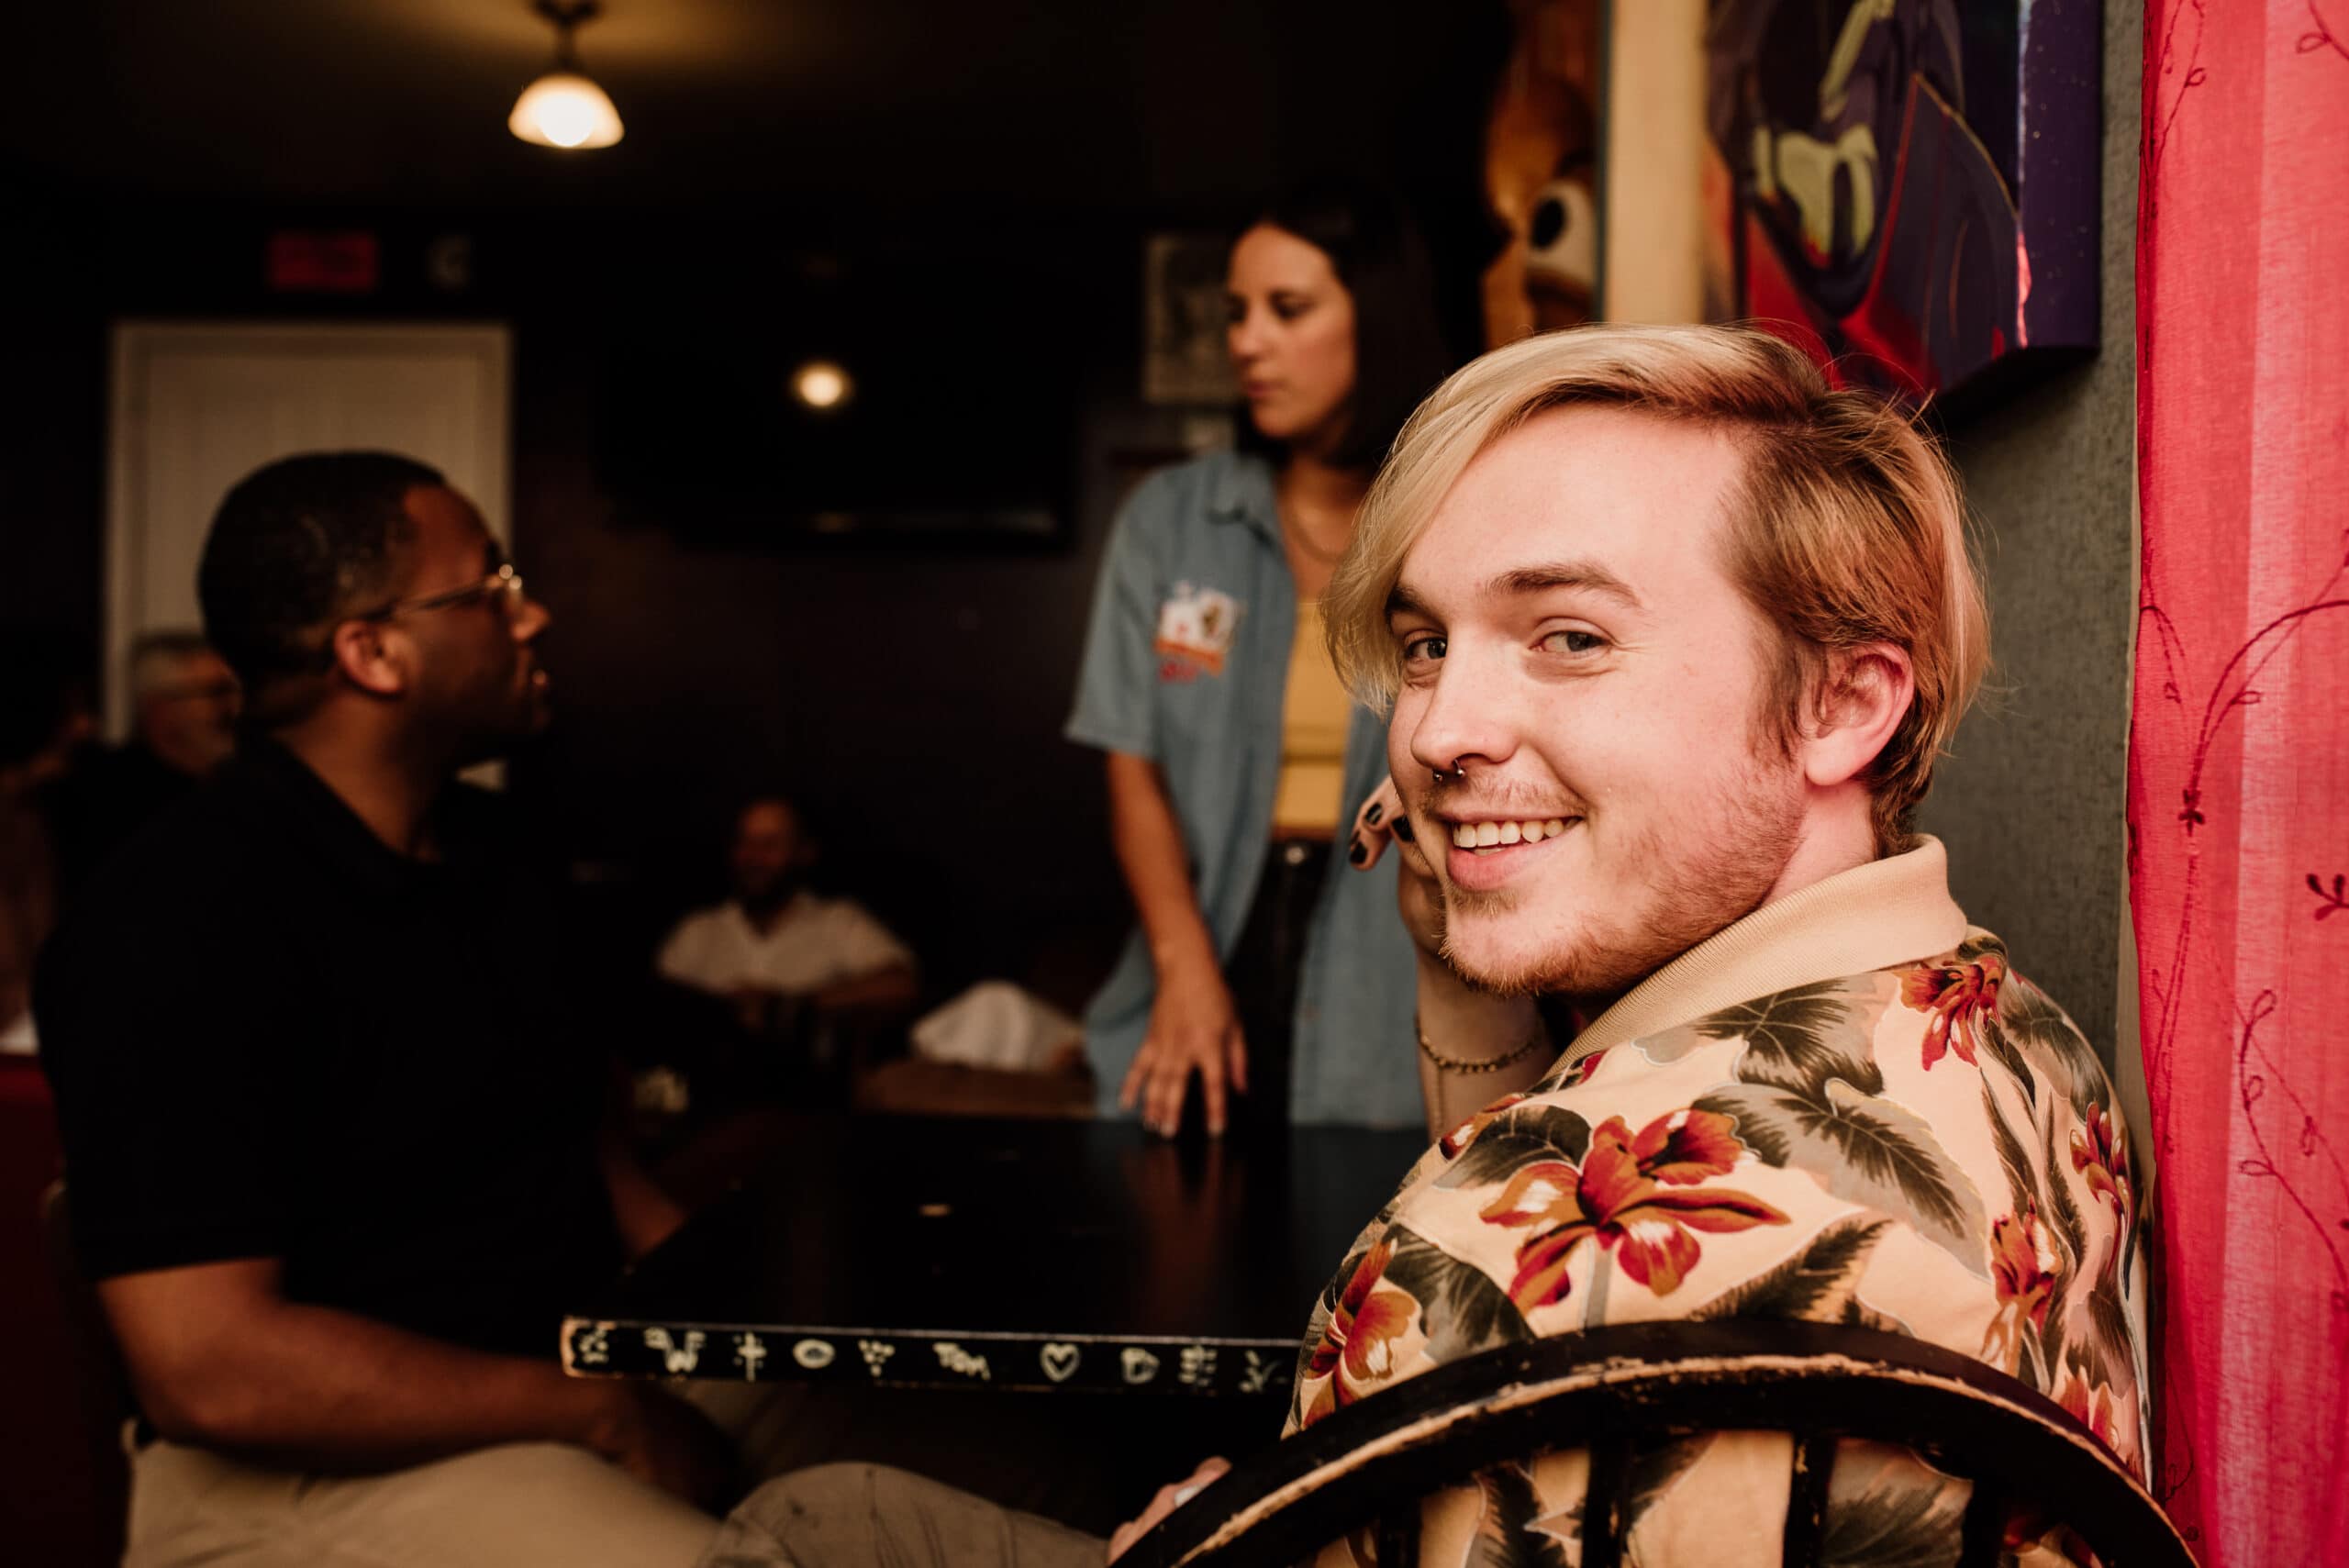 A young man in a patterned shirt smiles at the camera while seated in a dimly lit room with other people.